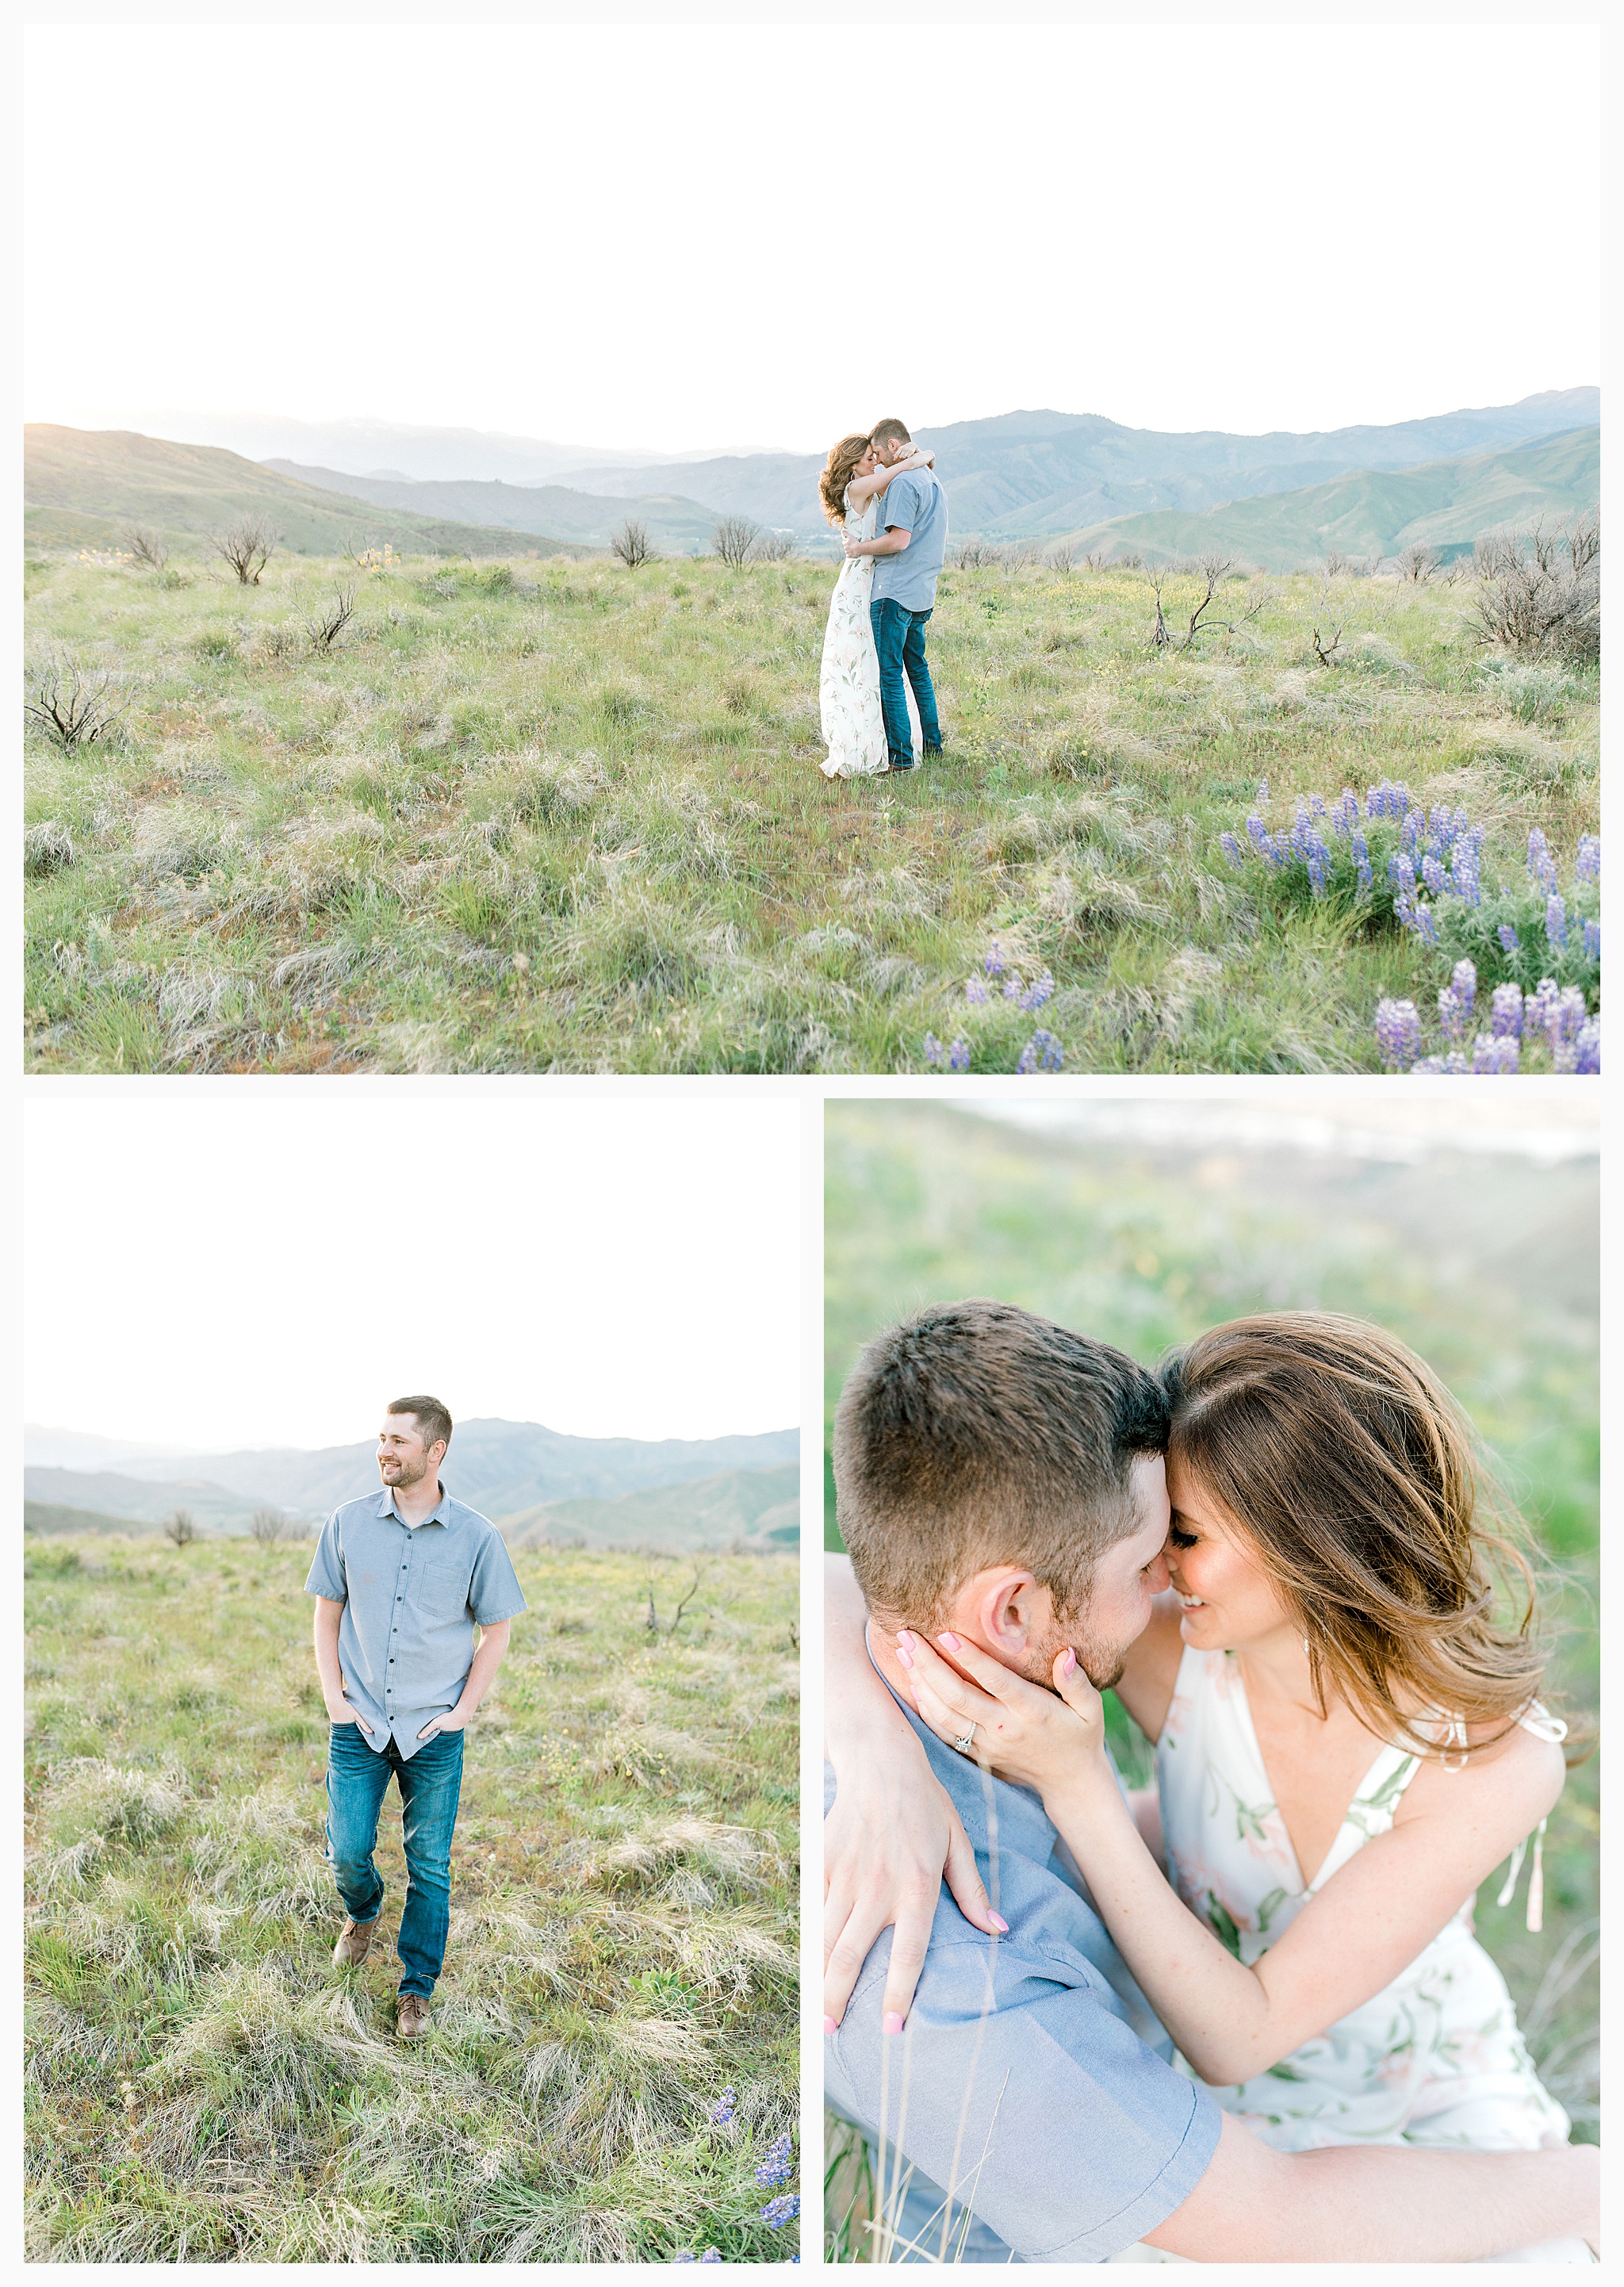 Engagement session amongst the wildflowers in Wenatchee, Washington | Engagement Session Outfit Inspiration for Wedding Photography with Emma Rose Company | Light and Airy PNW Photographer, Seattle Bride_0020.jpg